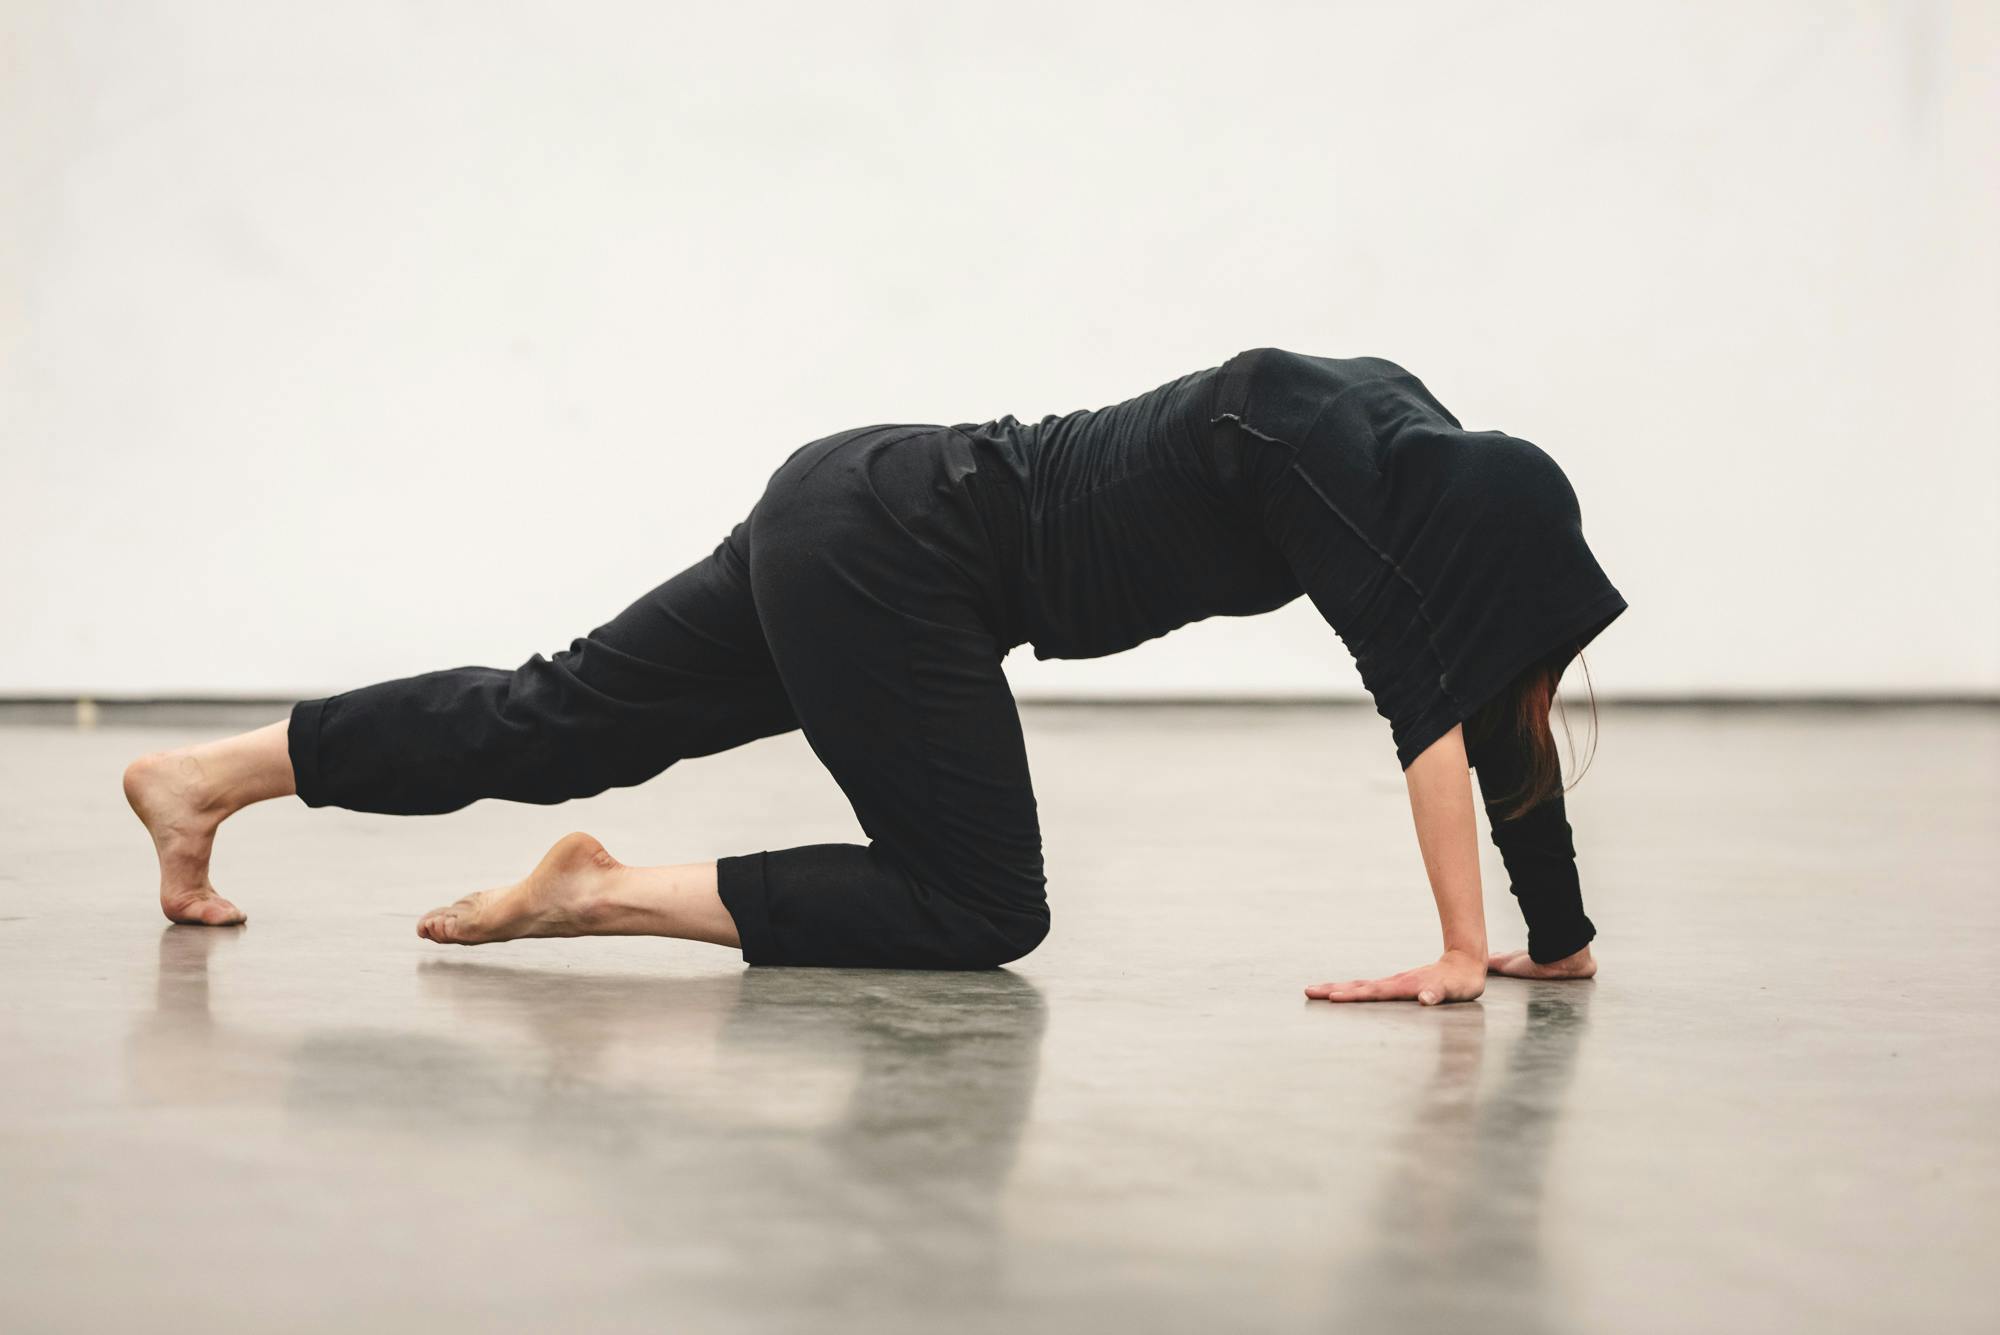 A photograph of a person in a black outfit performing in the gallery. The person stretches their arms on the floor and kneels on their right knee, stretching the other leg. 